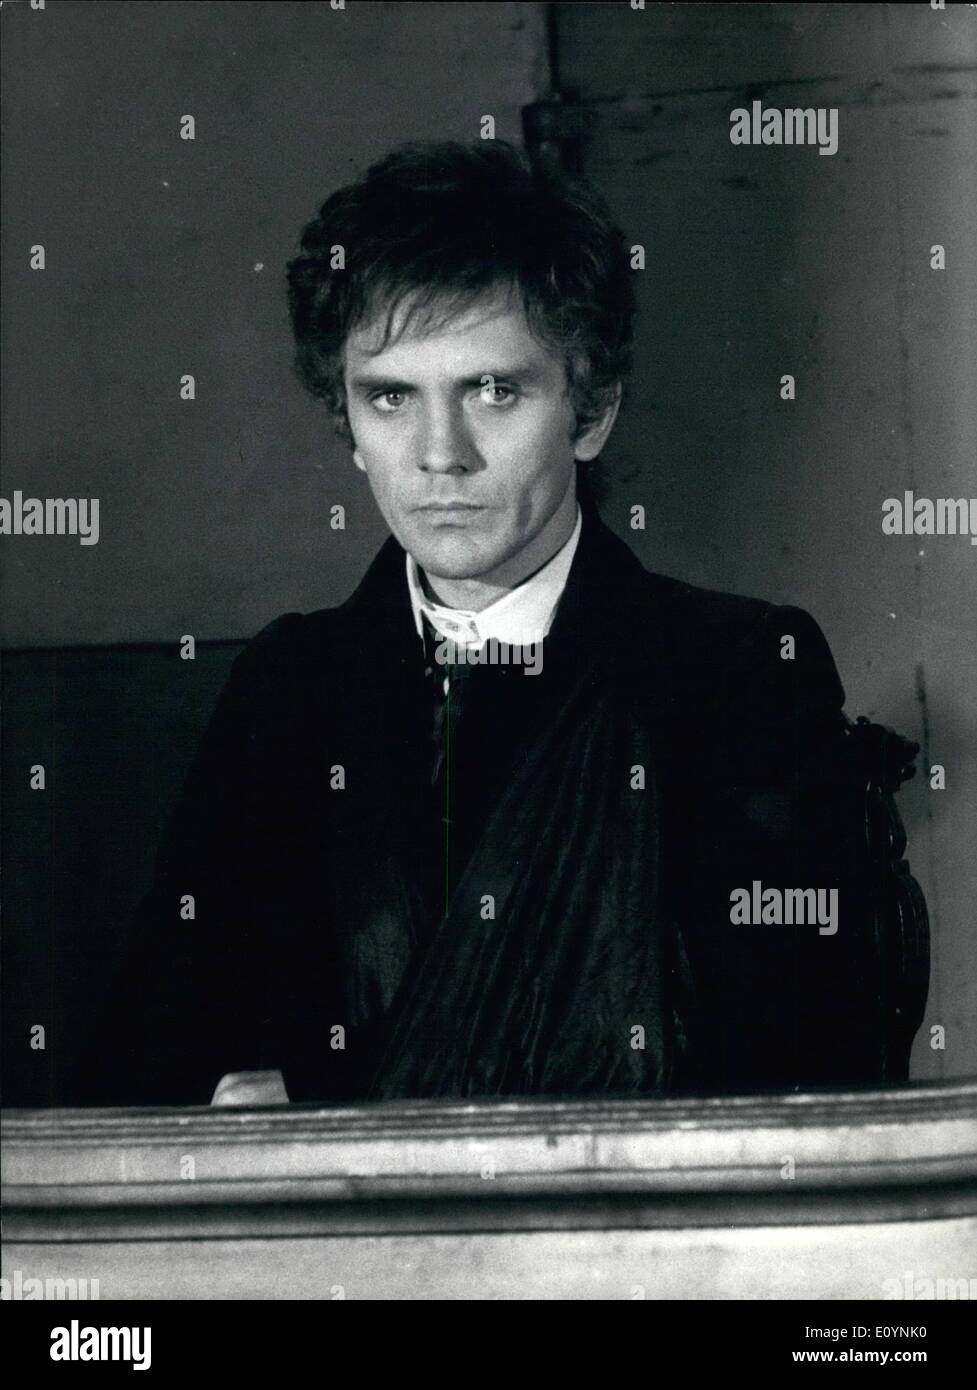 Dec. 12, 1970 - :A Season in the Hell'' is the title of the film that counts the story of the life of the young French poet Arthur Rimbaud, played by Terence Stamp. Co starring Terence Stamp, is in the film the French actor Jean Claude Bialy who is playing the role of Paul Verlaine who had a unholy passion for the young Kimbaud. The scene showed counts the trial following the shot of the revolver that Verlaine shot against Kimbaud wounding him to the left arm. Photo Shows Terence Stamp as Arthur Kimbaud in the court. Stock Photo